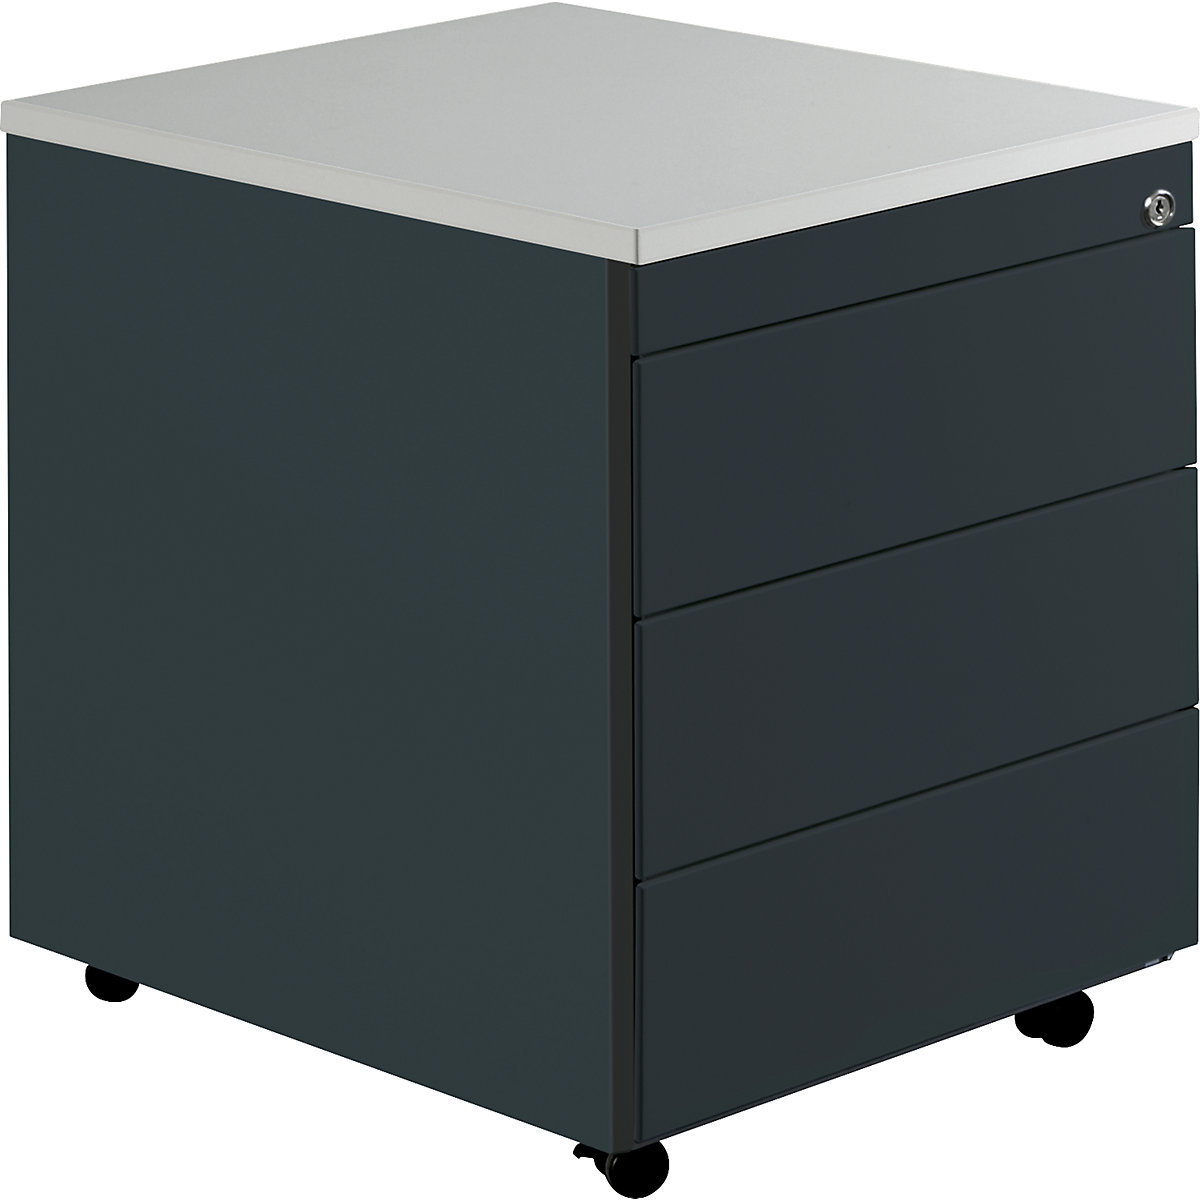 Drawer pedestal with castors – mauser, HxD 579 x 600 mm, plastic top, 3 drawers, charcoal / charcoal / light grey-4